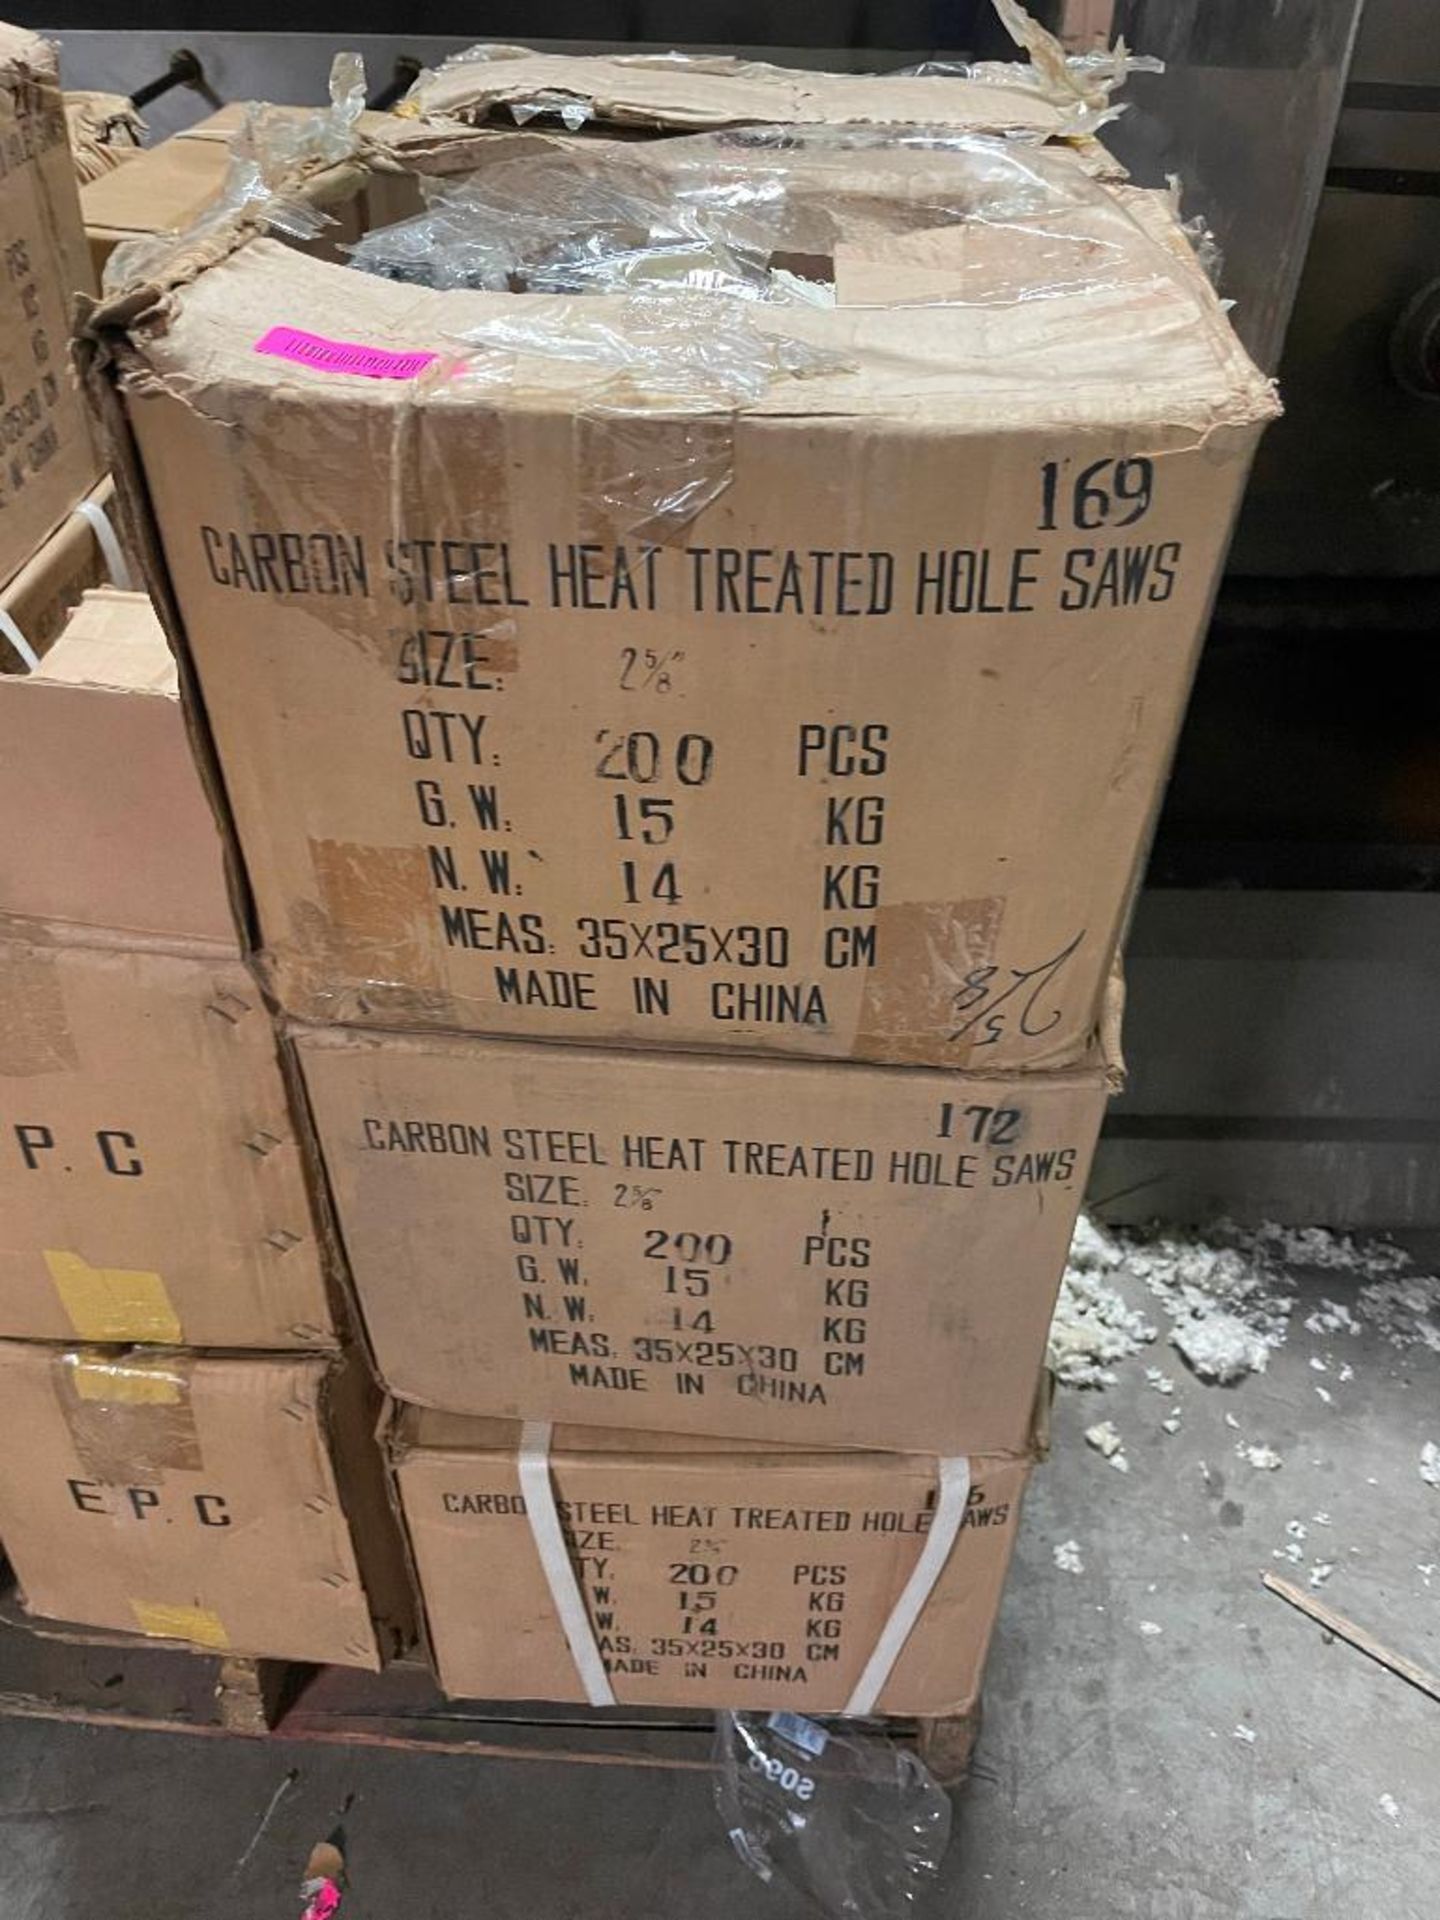 (3) CASES OF 2 5/8" CARBON STEEL HEAT TREATED HOLE SAWS. ADDITIONAL INFORMATION 200 PER CASE, 600 IN - Image 2 of 4